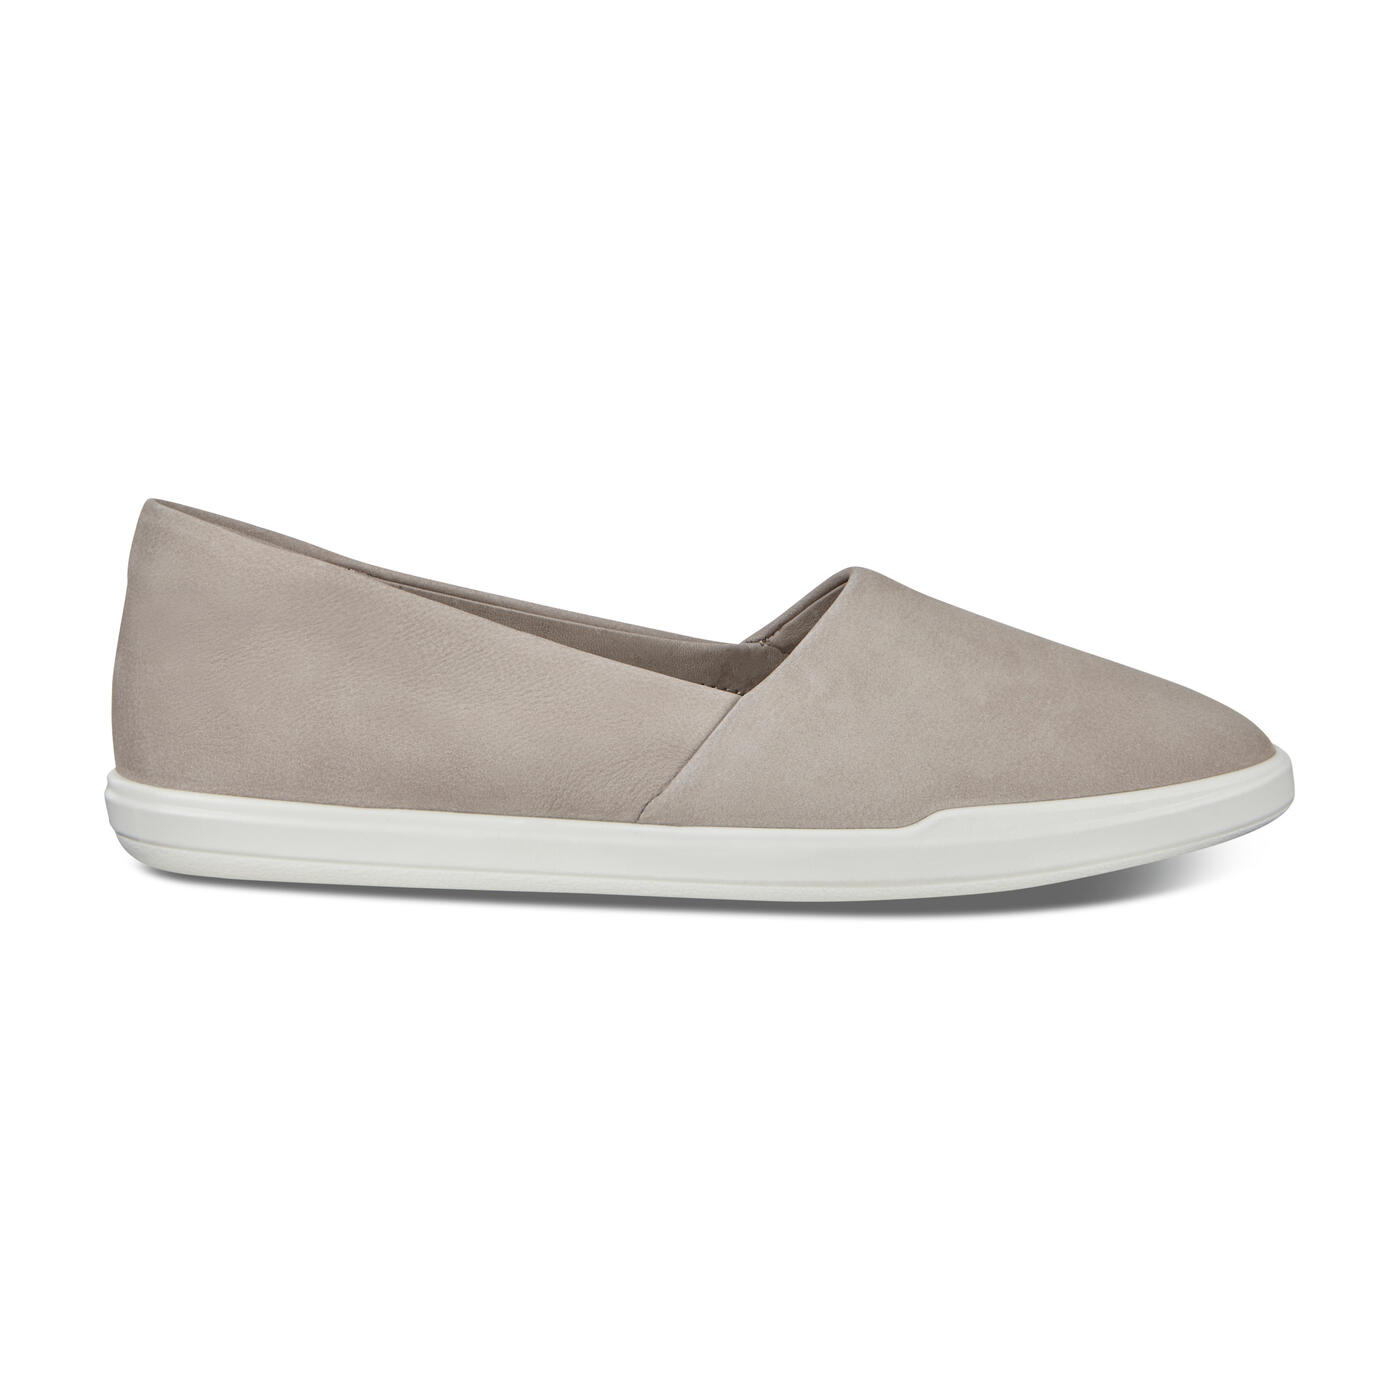 Women's Simpil Loafers | Official Store | ECCO® Shoes